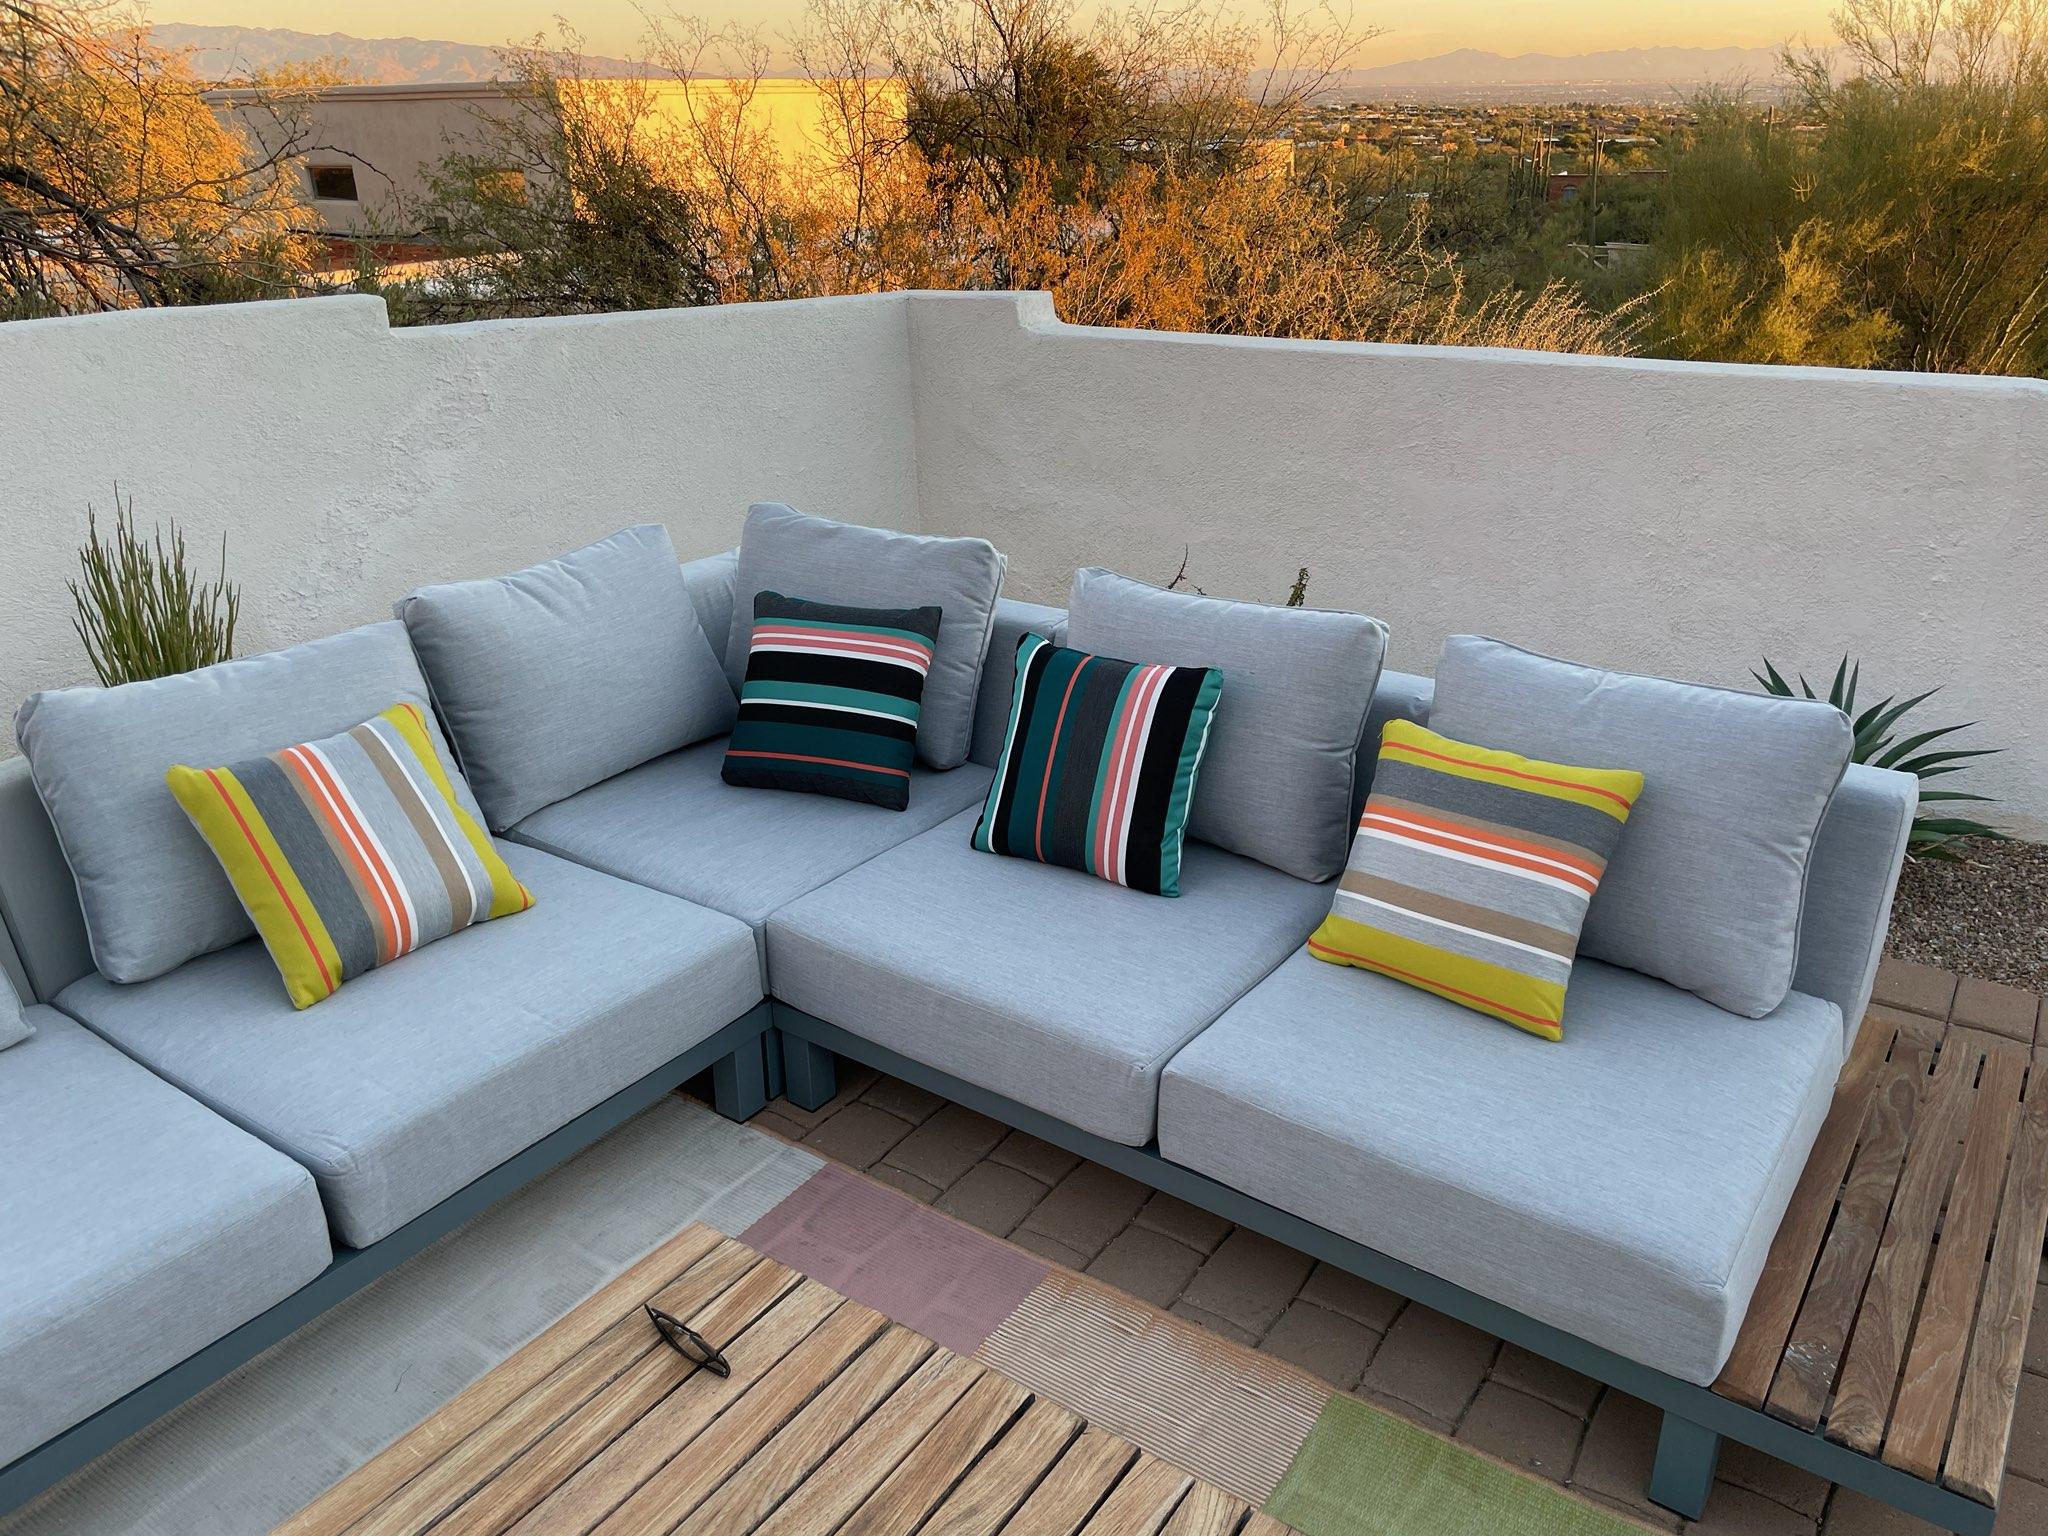 Colorful Outdoor Sofa Set from Fabrics That Go